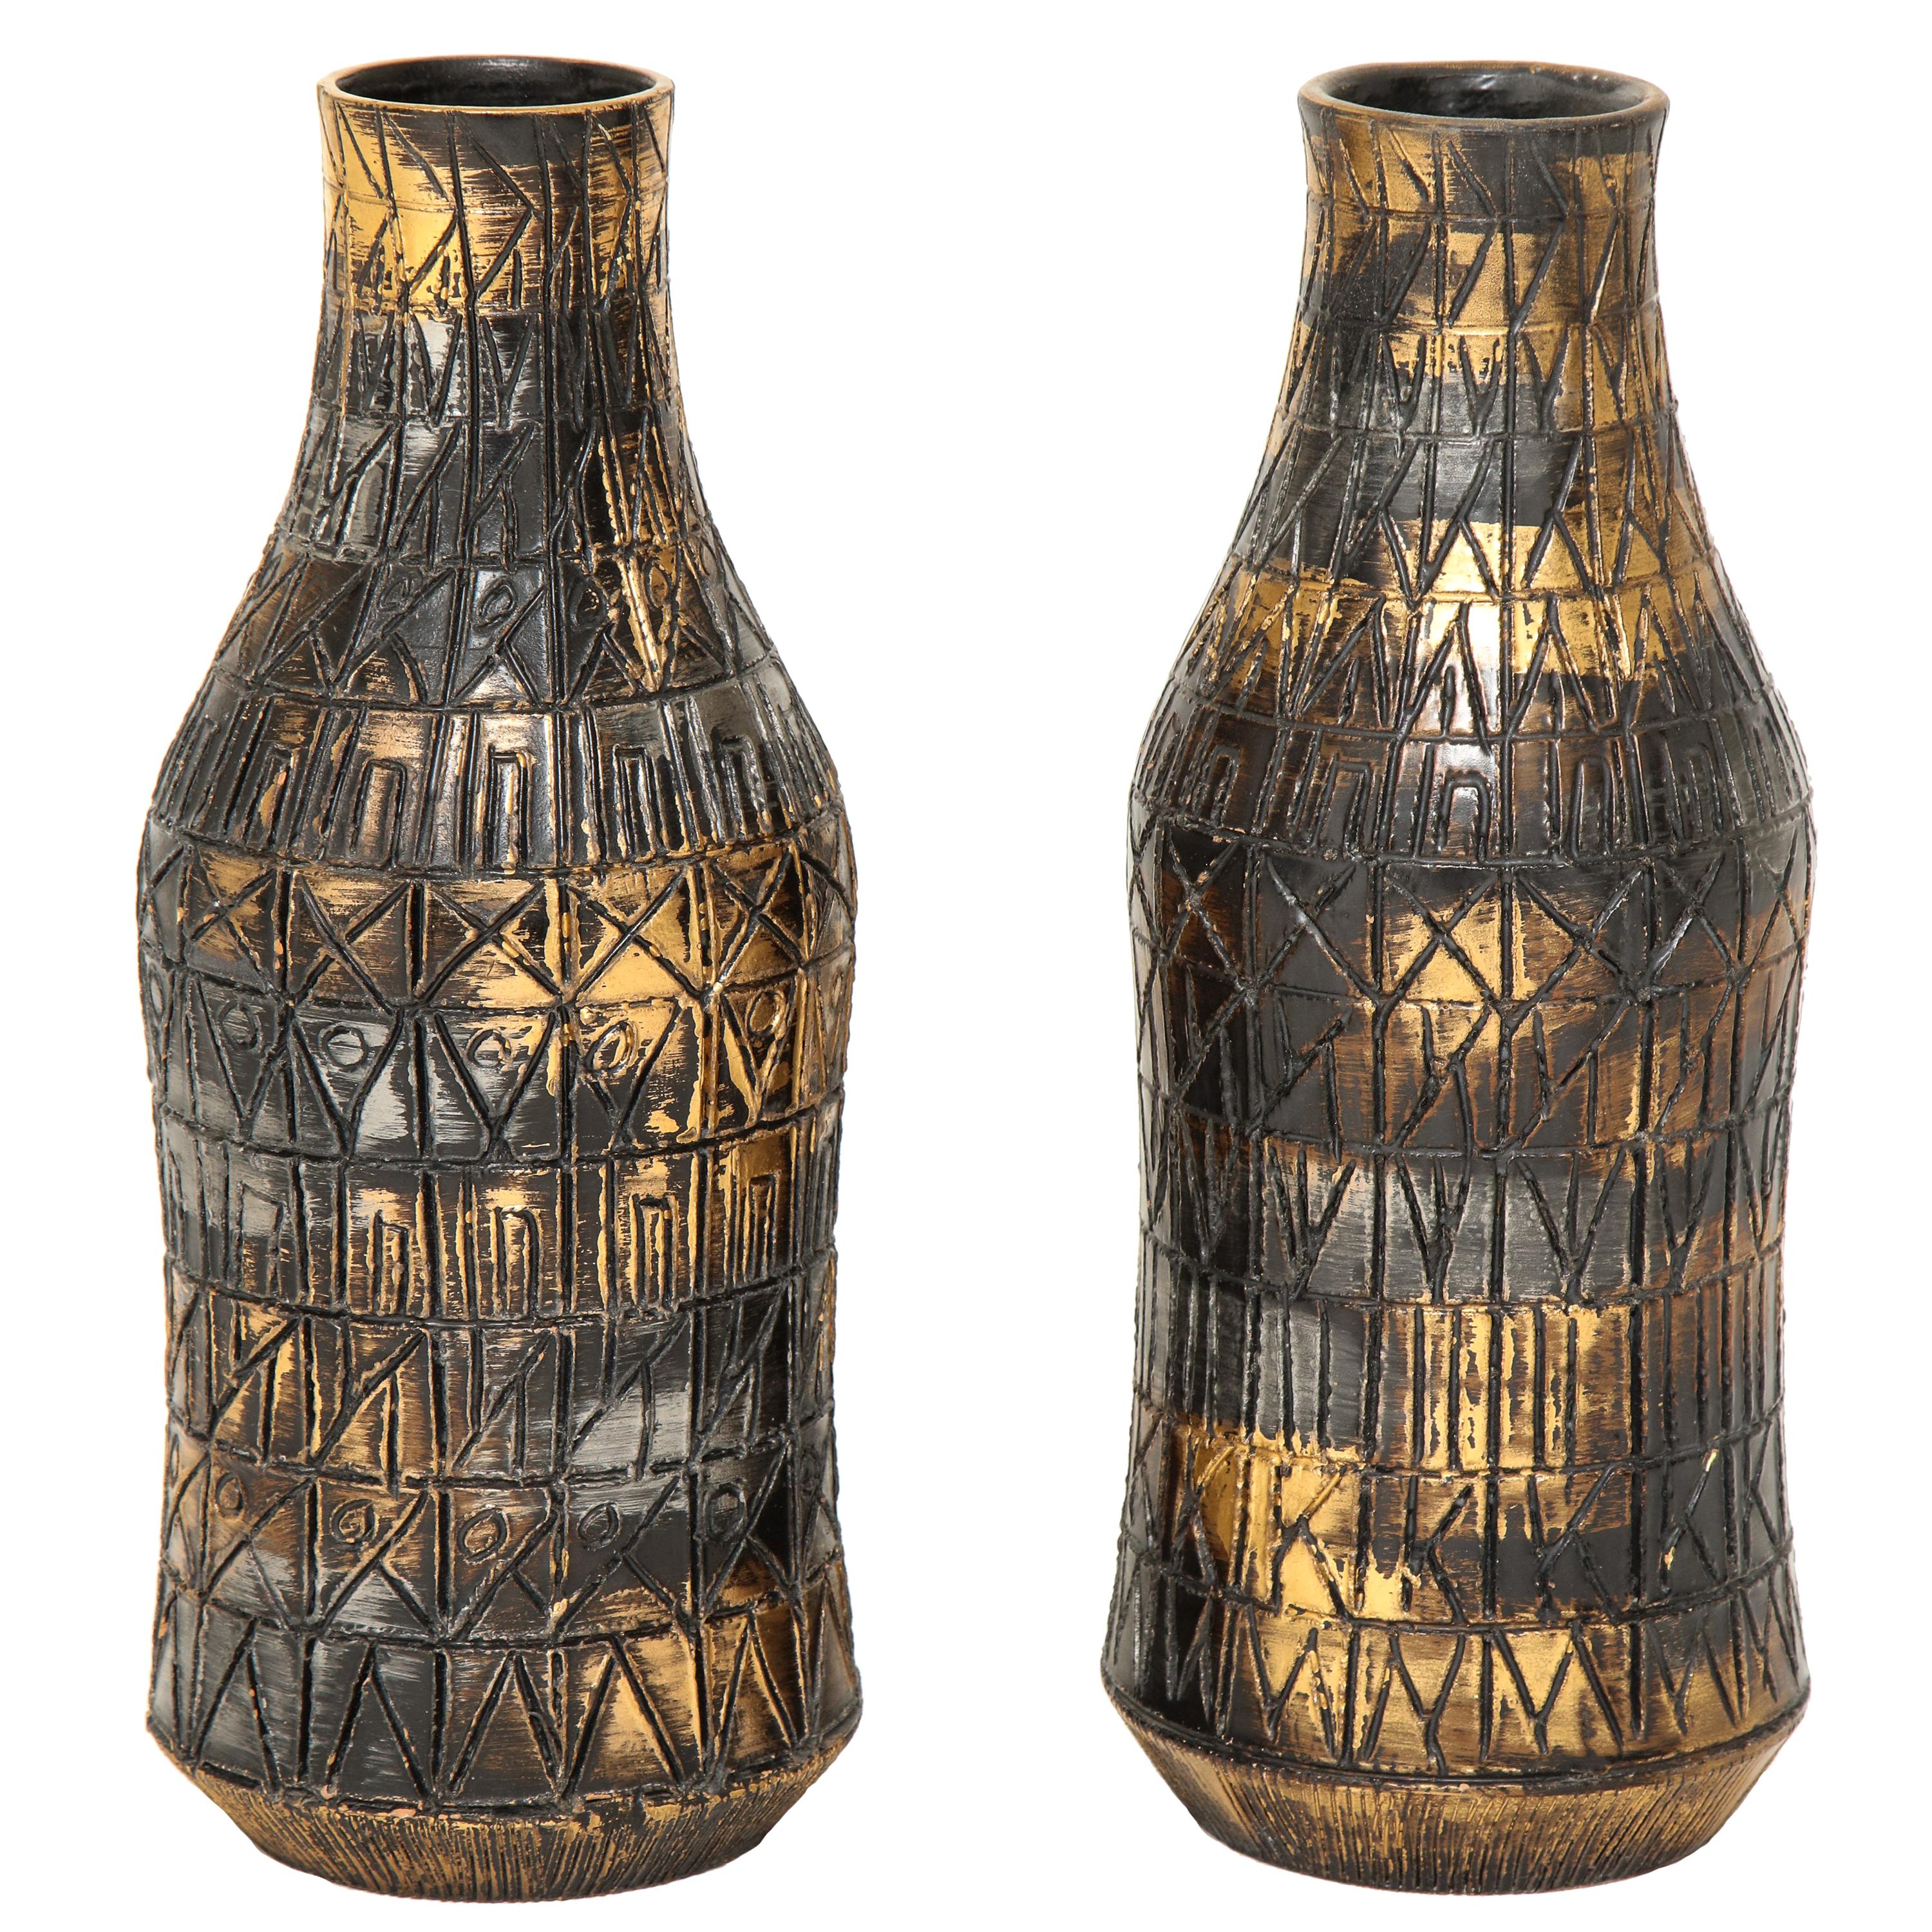 Raymor vases, ceramic, sgraffito, gold, silver, gunmetal, signed. A pair of medium scale bottle form vases with incised geometric patterns and glazed in a burnished gold, dark silver pewter with gunmetal bronze highlights. Signed Raymor 112 Italy on